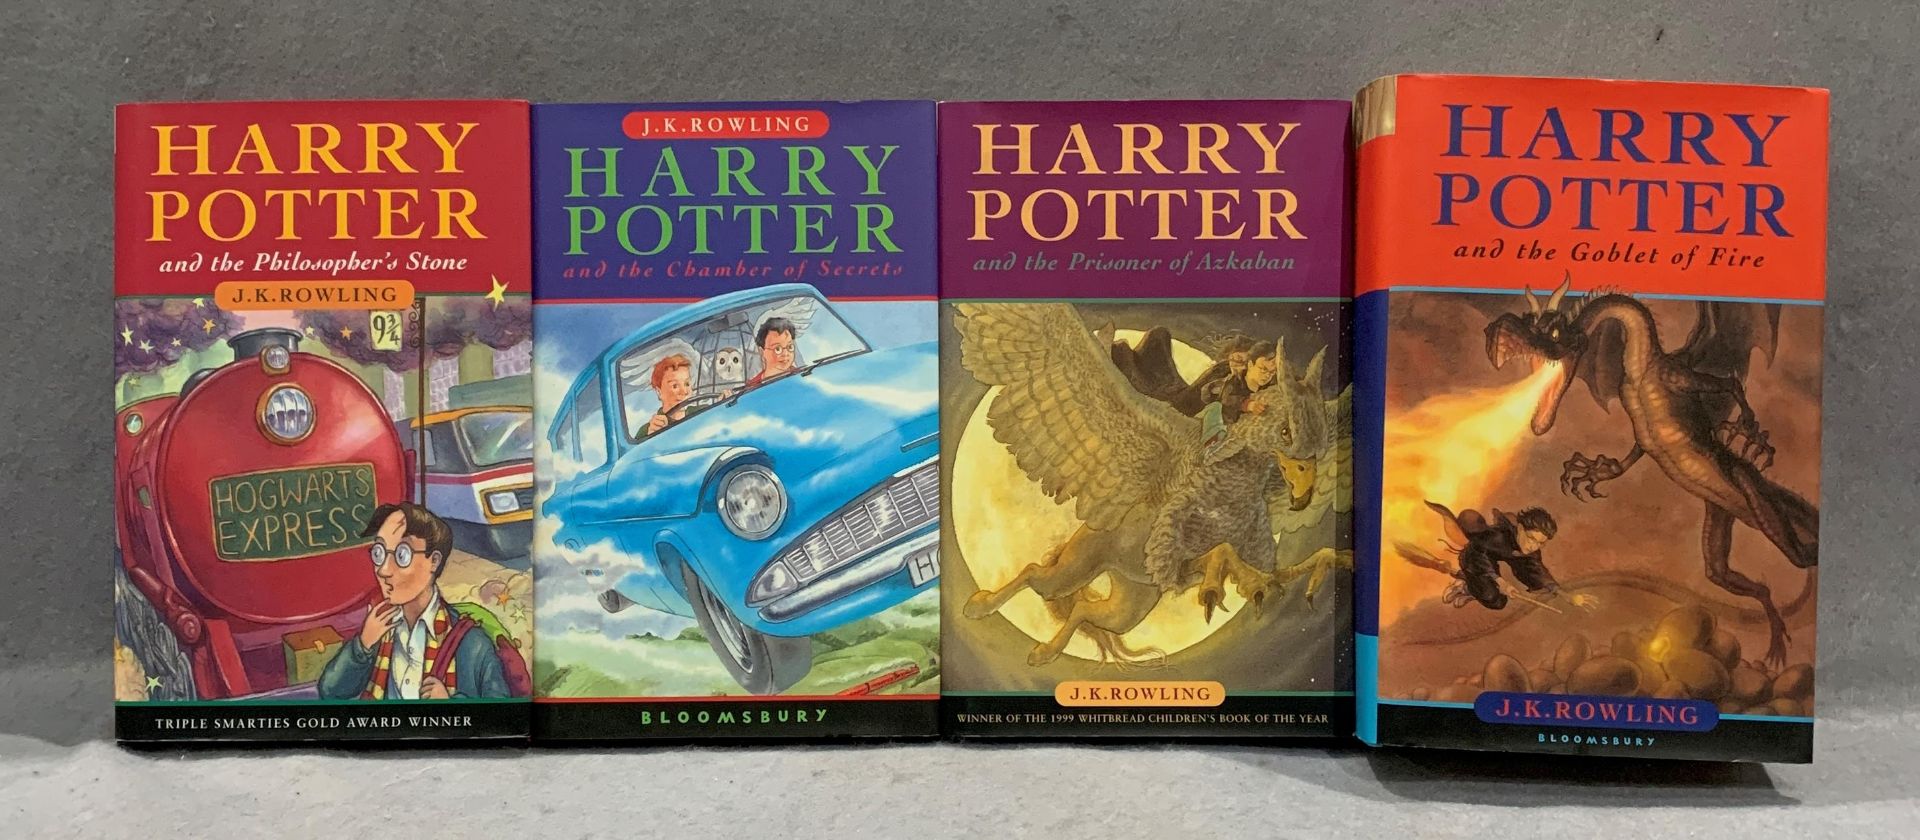 J K Rowling, four Harry Potter hard back books, published by Bloomsbury - The Philosopher's Stone,